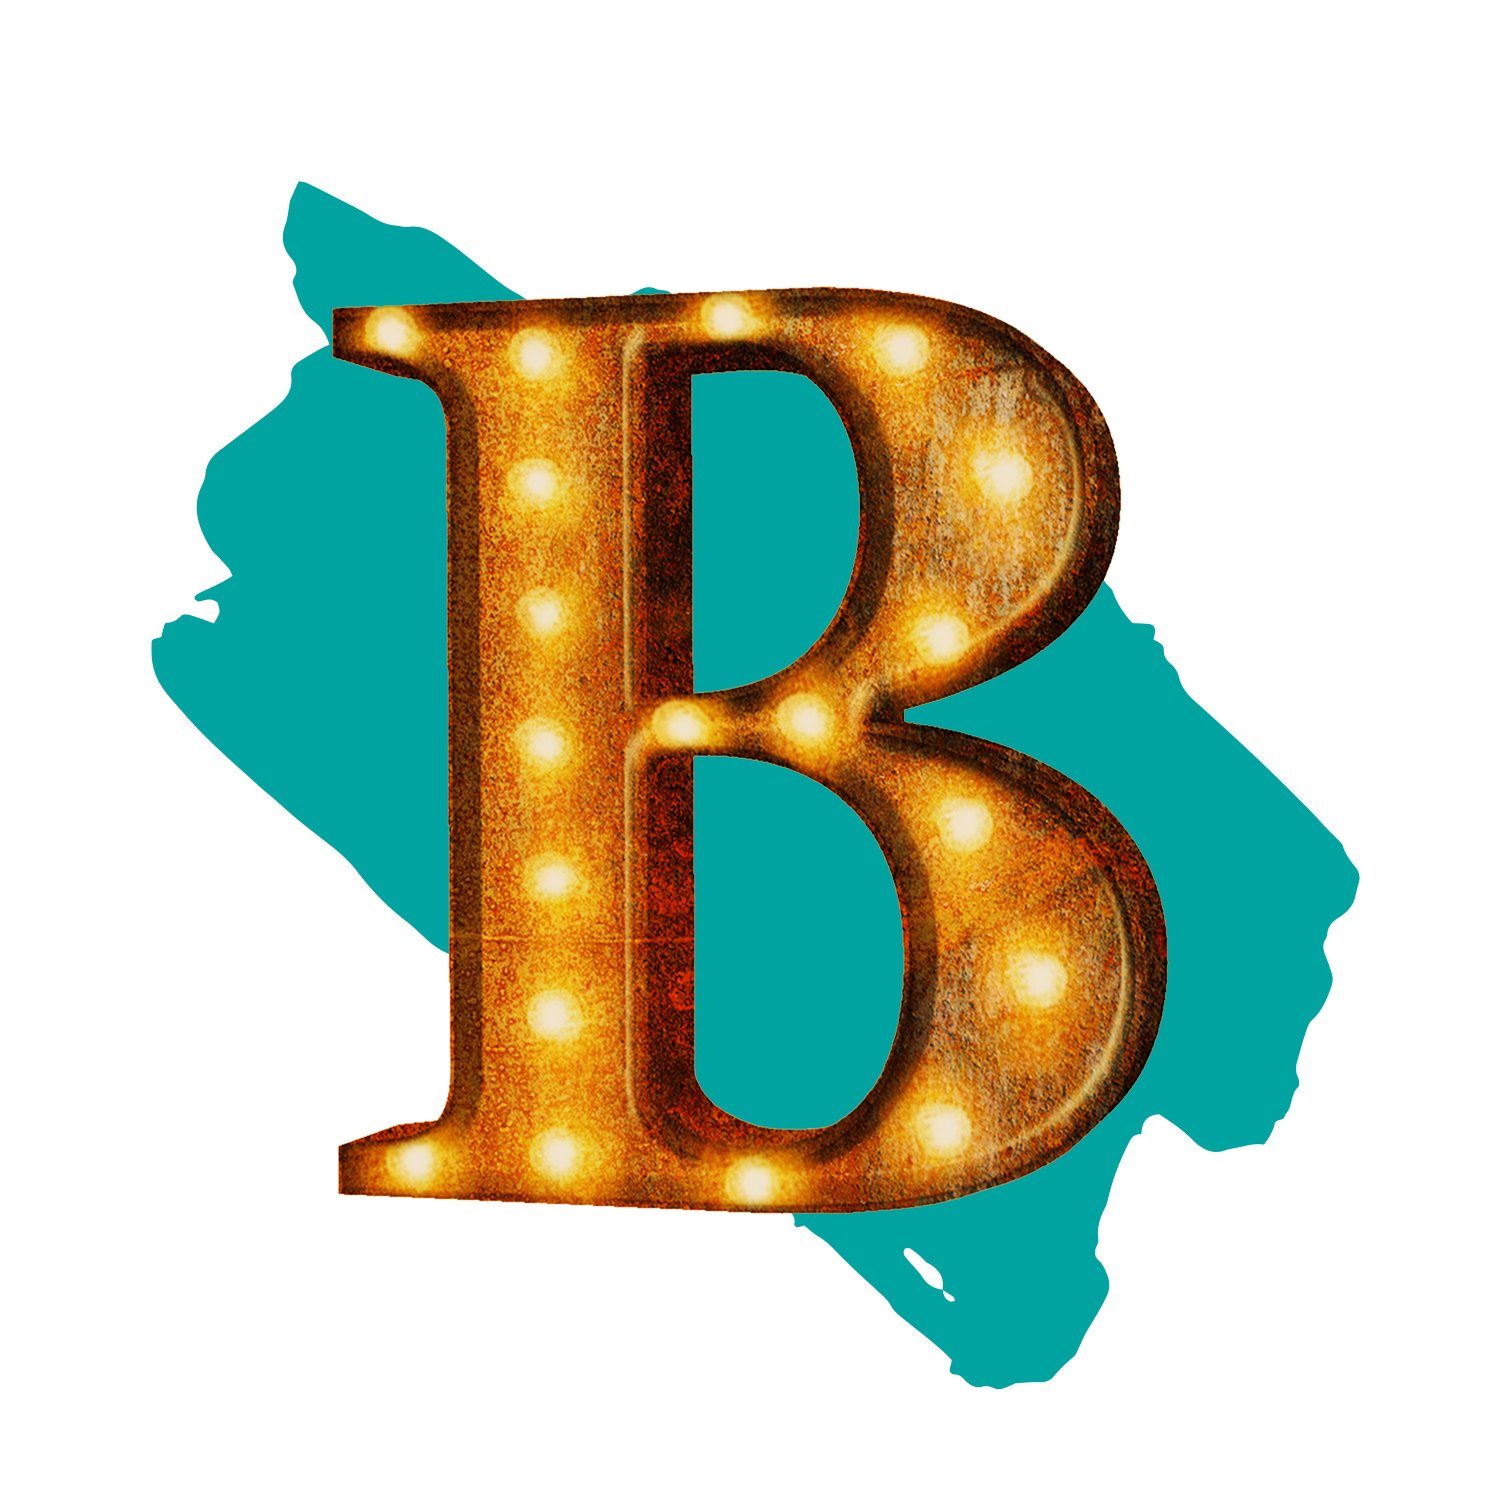 the letter b in bubble letters